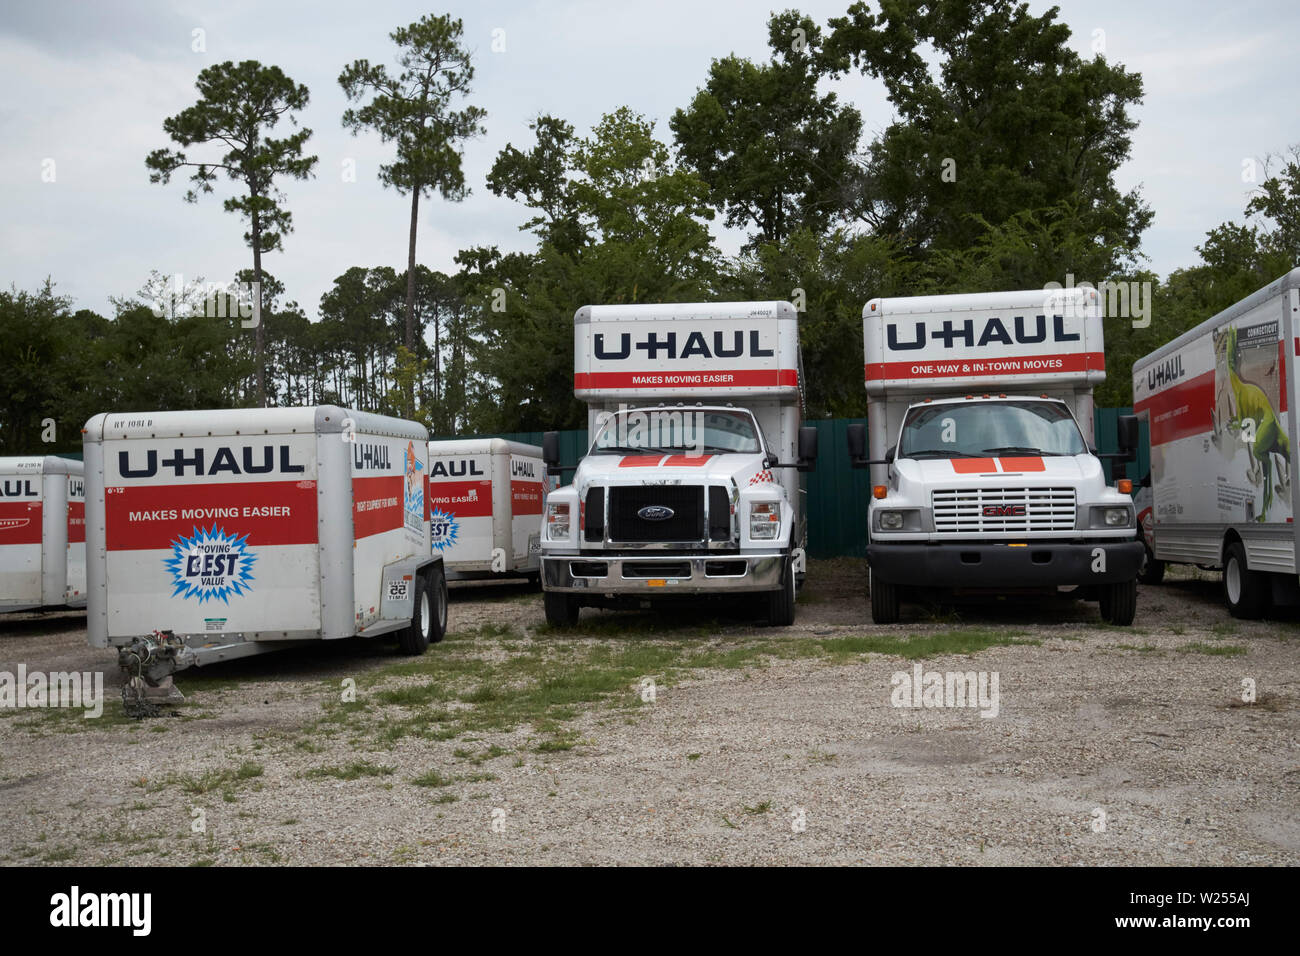 u-haul vans and trailers on a lot in Jacksonville Florida USA Stock Photo